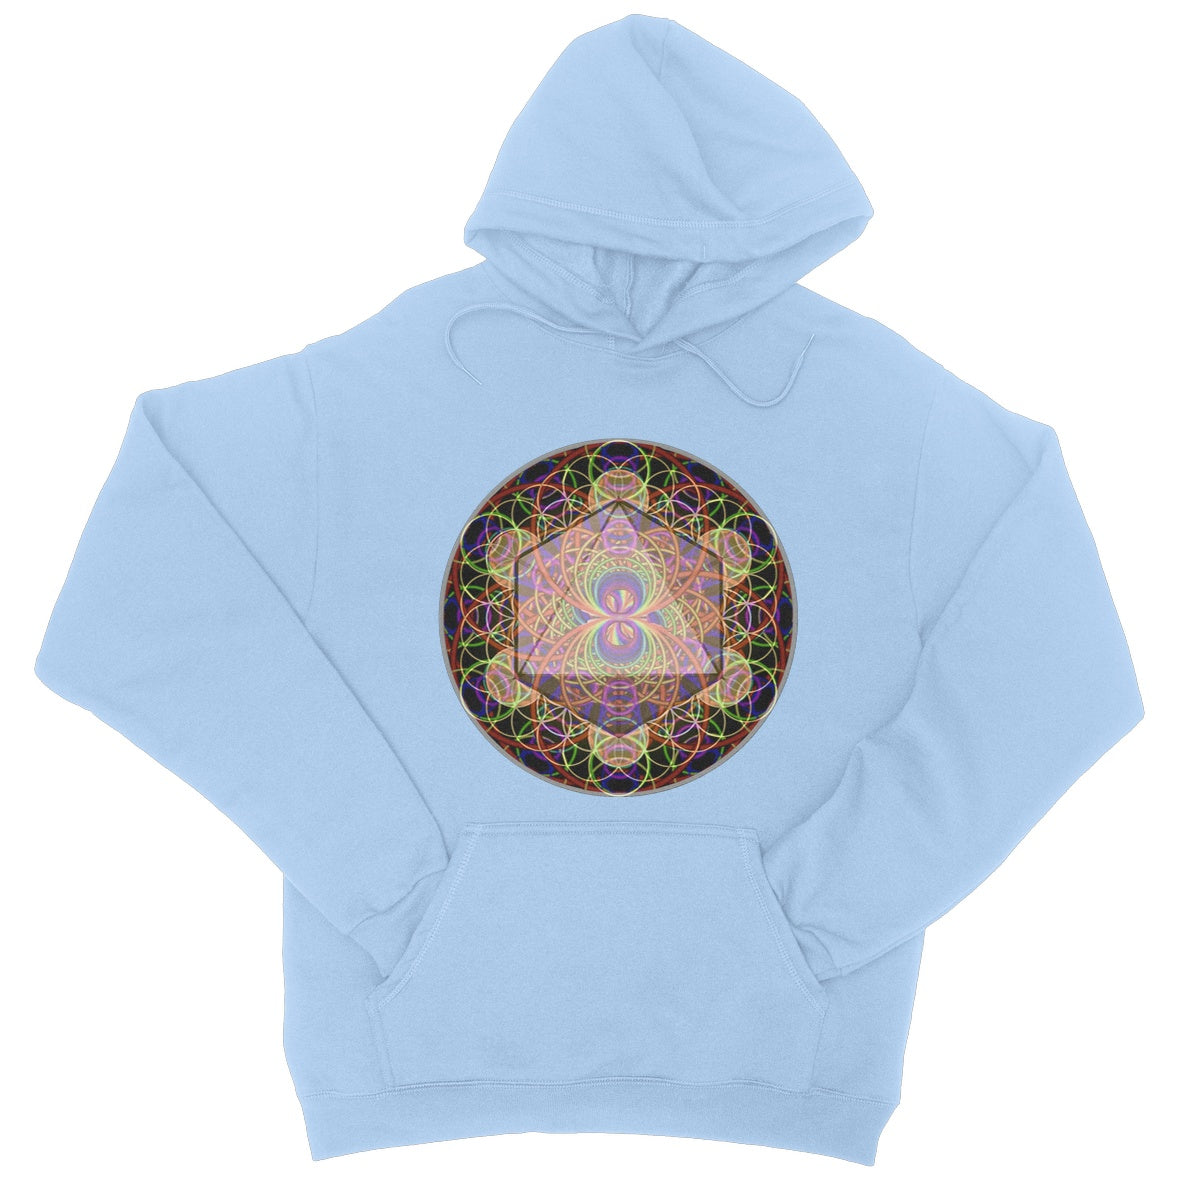 The Platonic Solid Octahedron College Hoodie